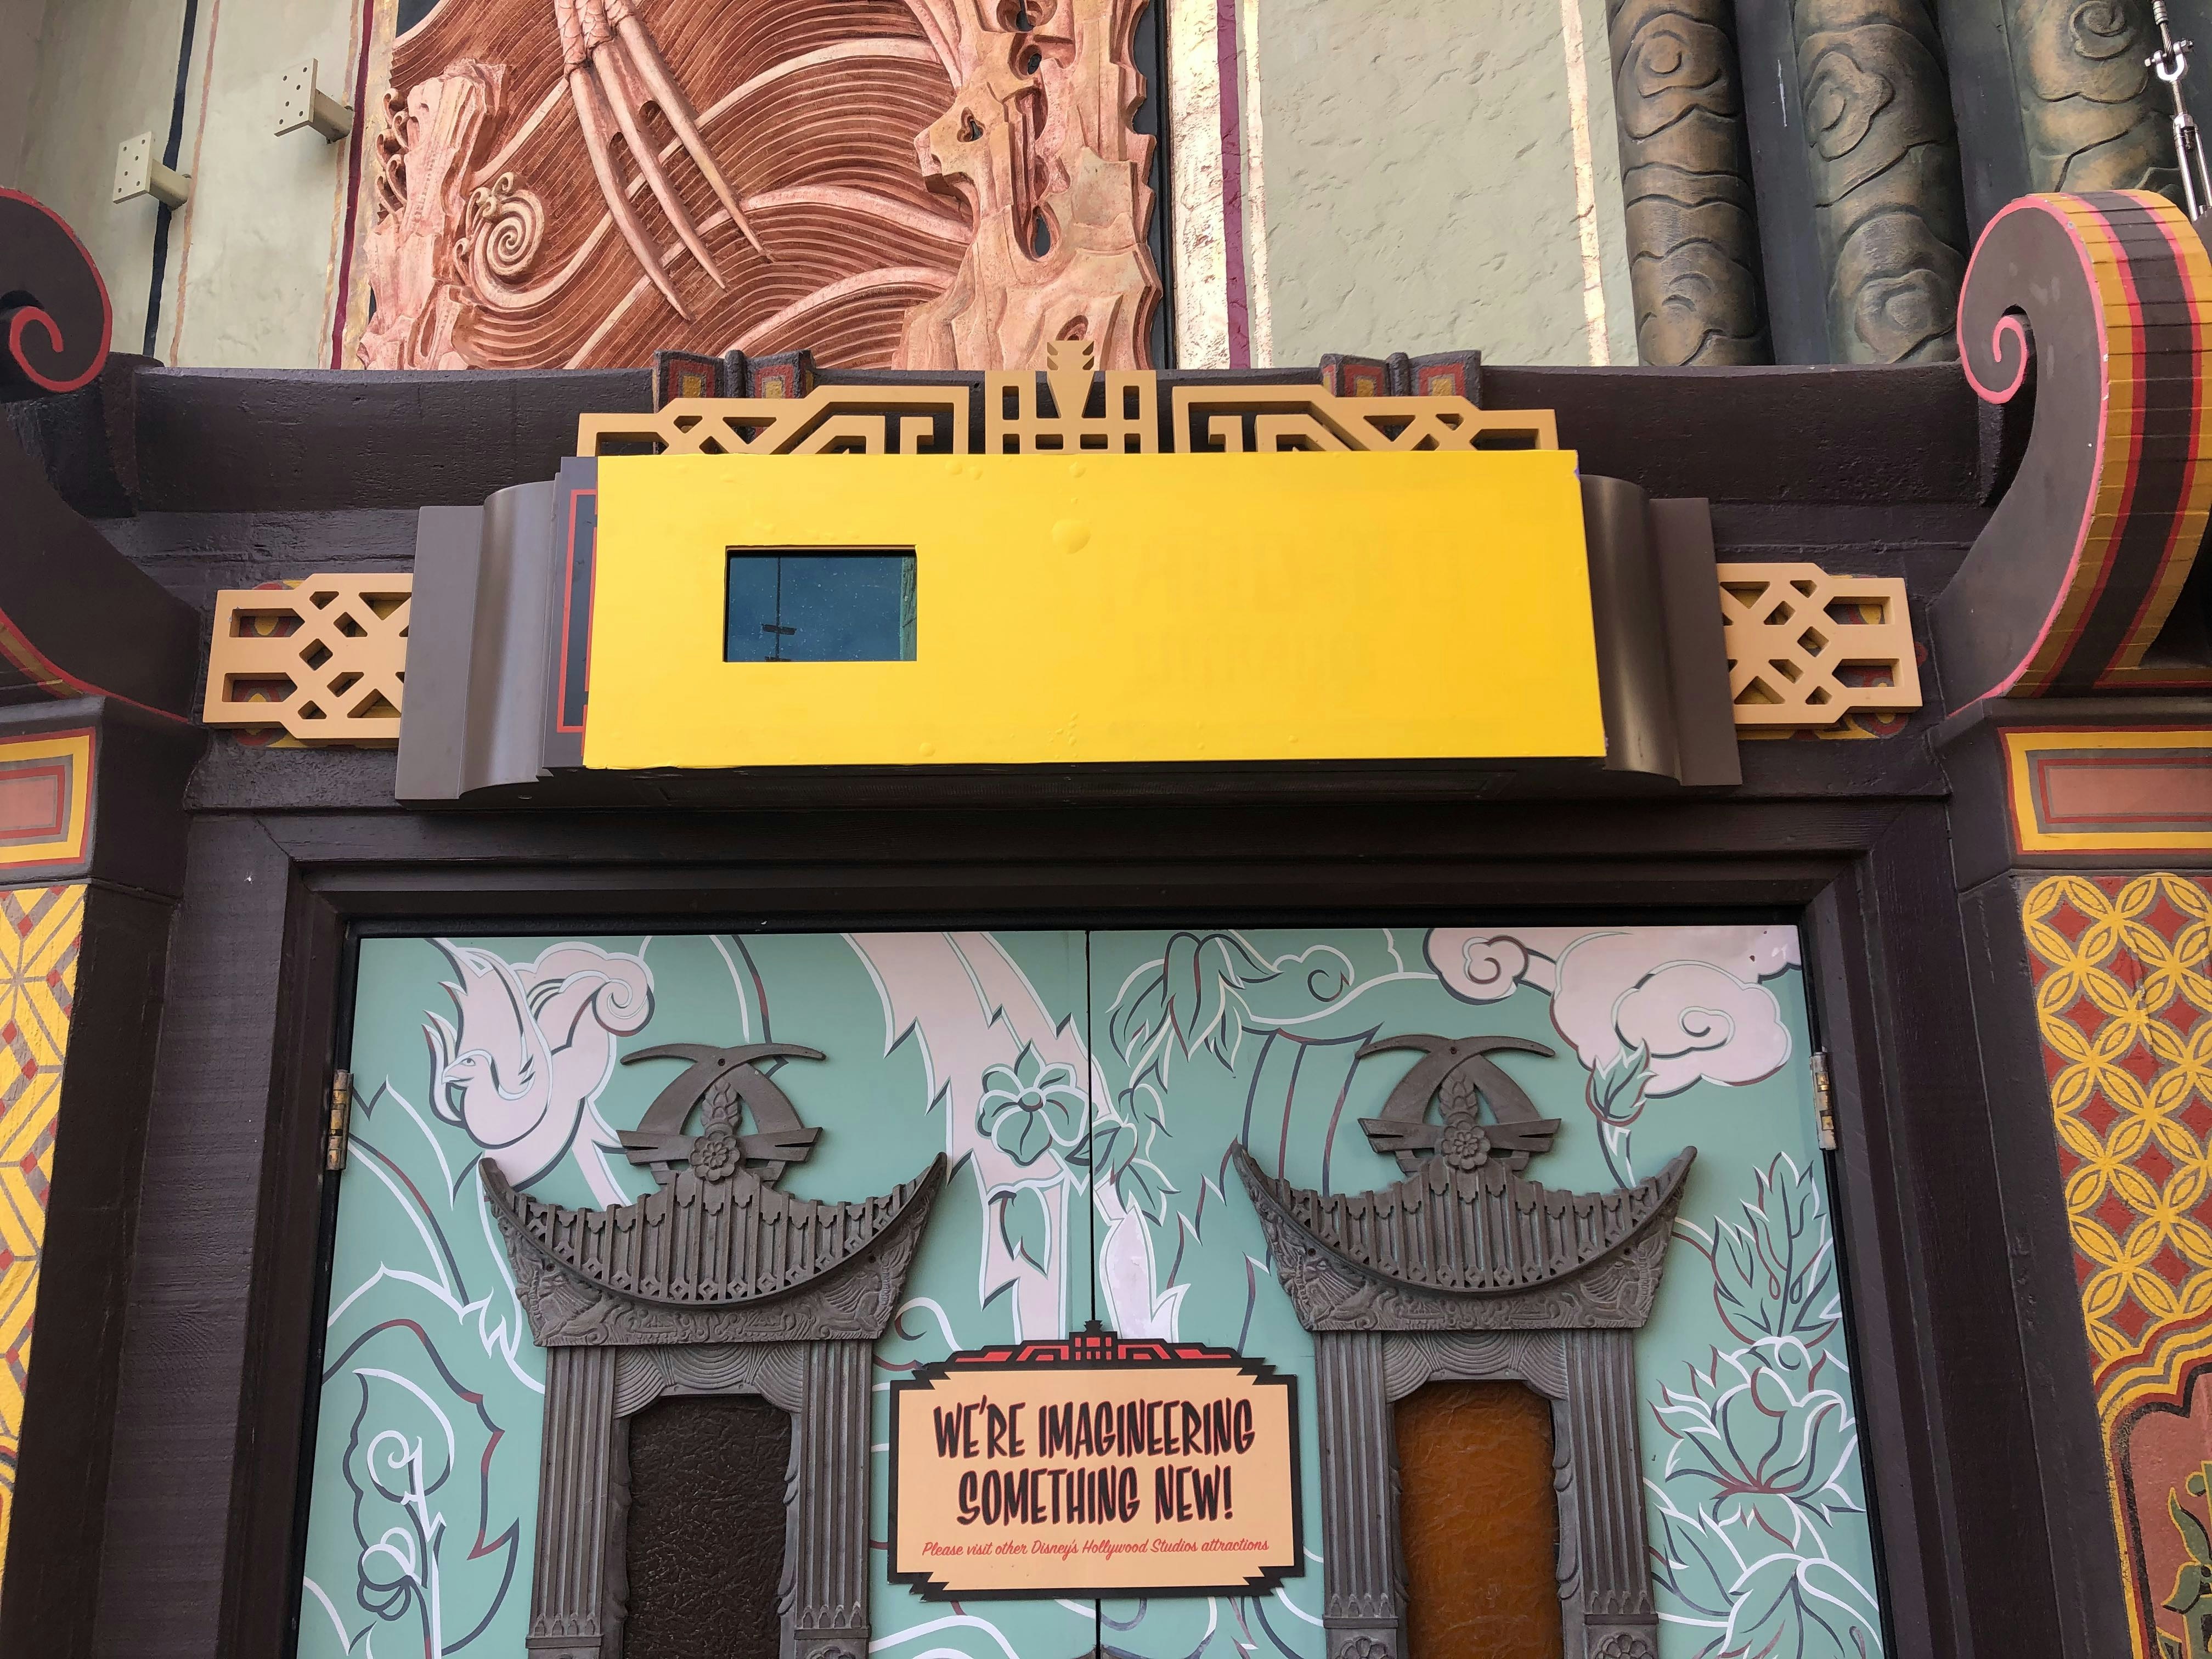 chinese theatre mickey and minnies runaway railway wait times and exit signs jan 2020 15.jpg?auto=compress%2Cformat&ixlib=php 1.2